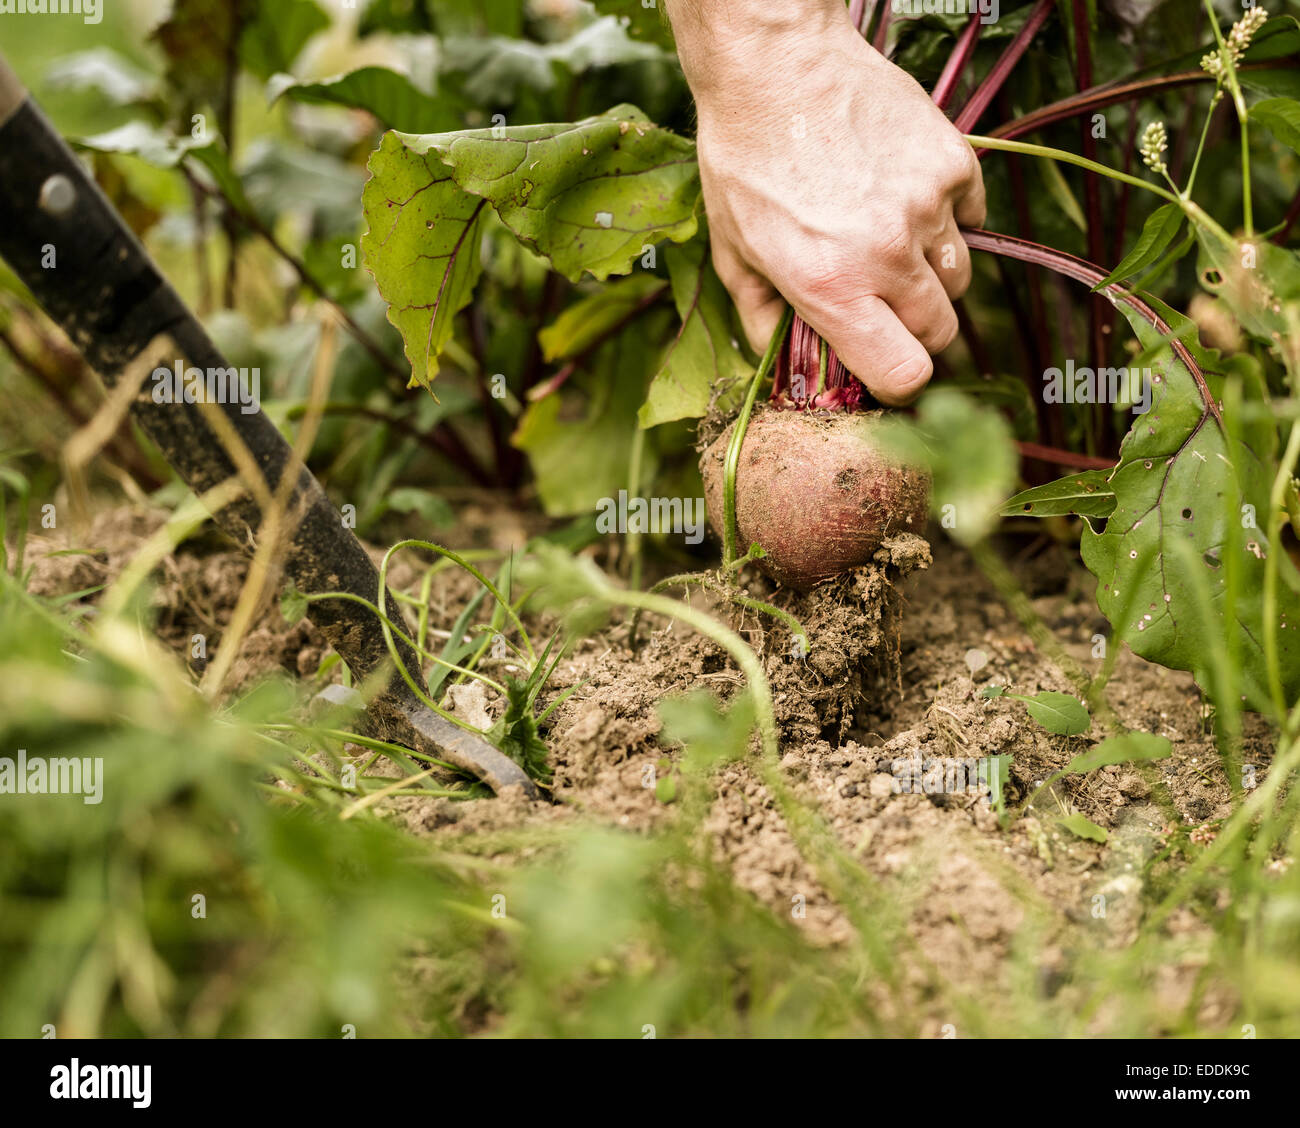 Hand pulling out a beetroot plant from the soil. Stock Photo